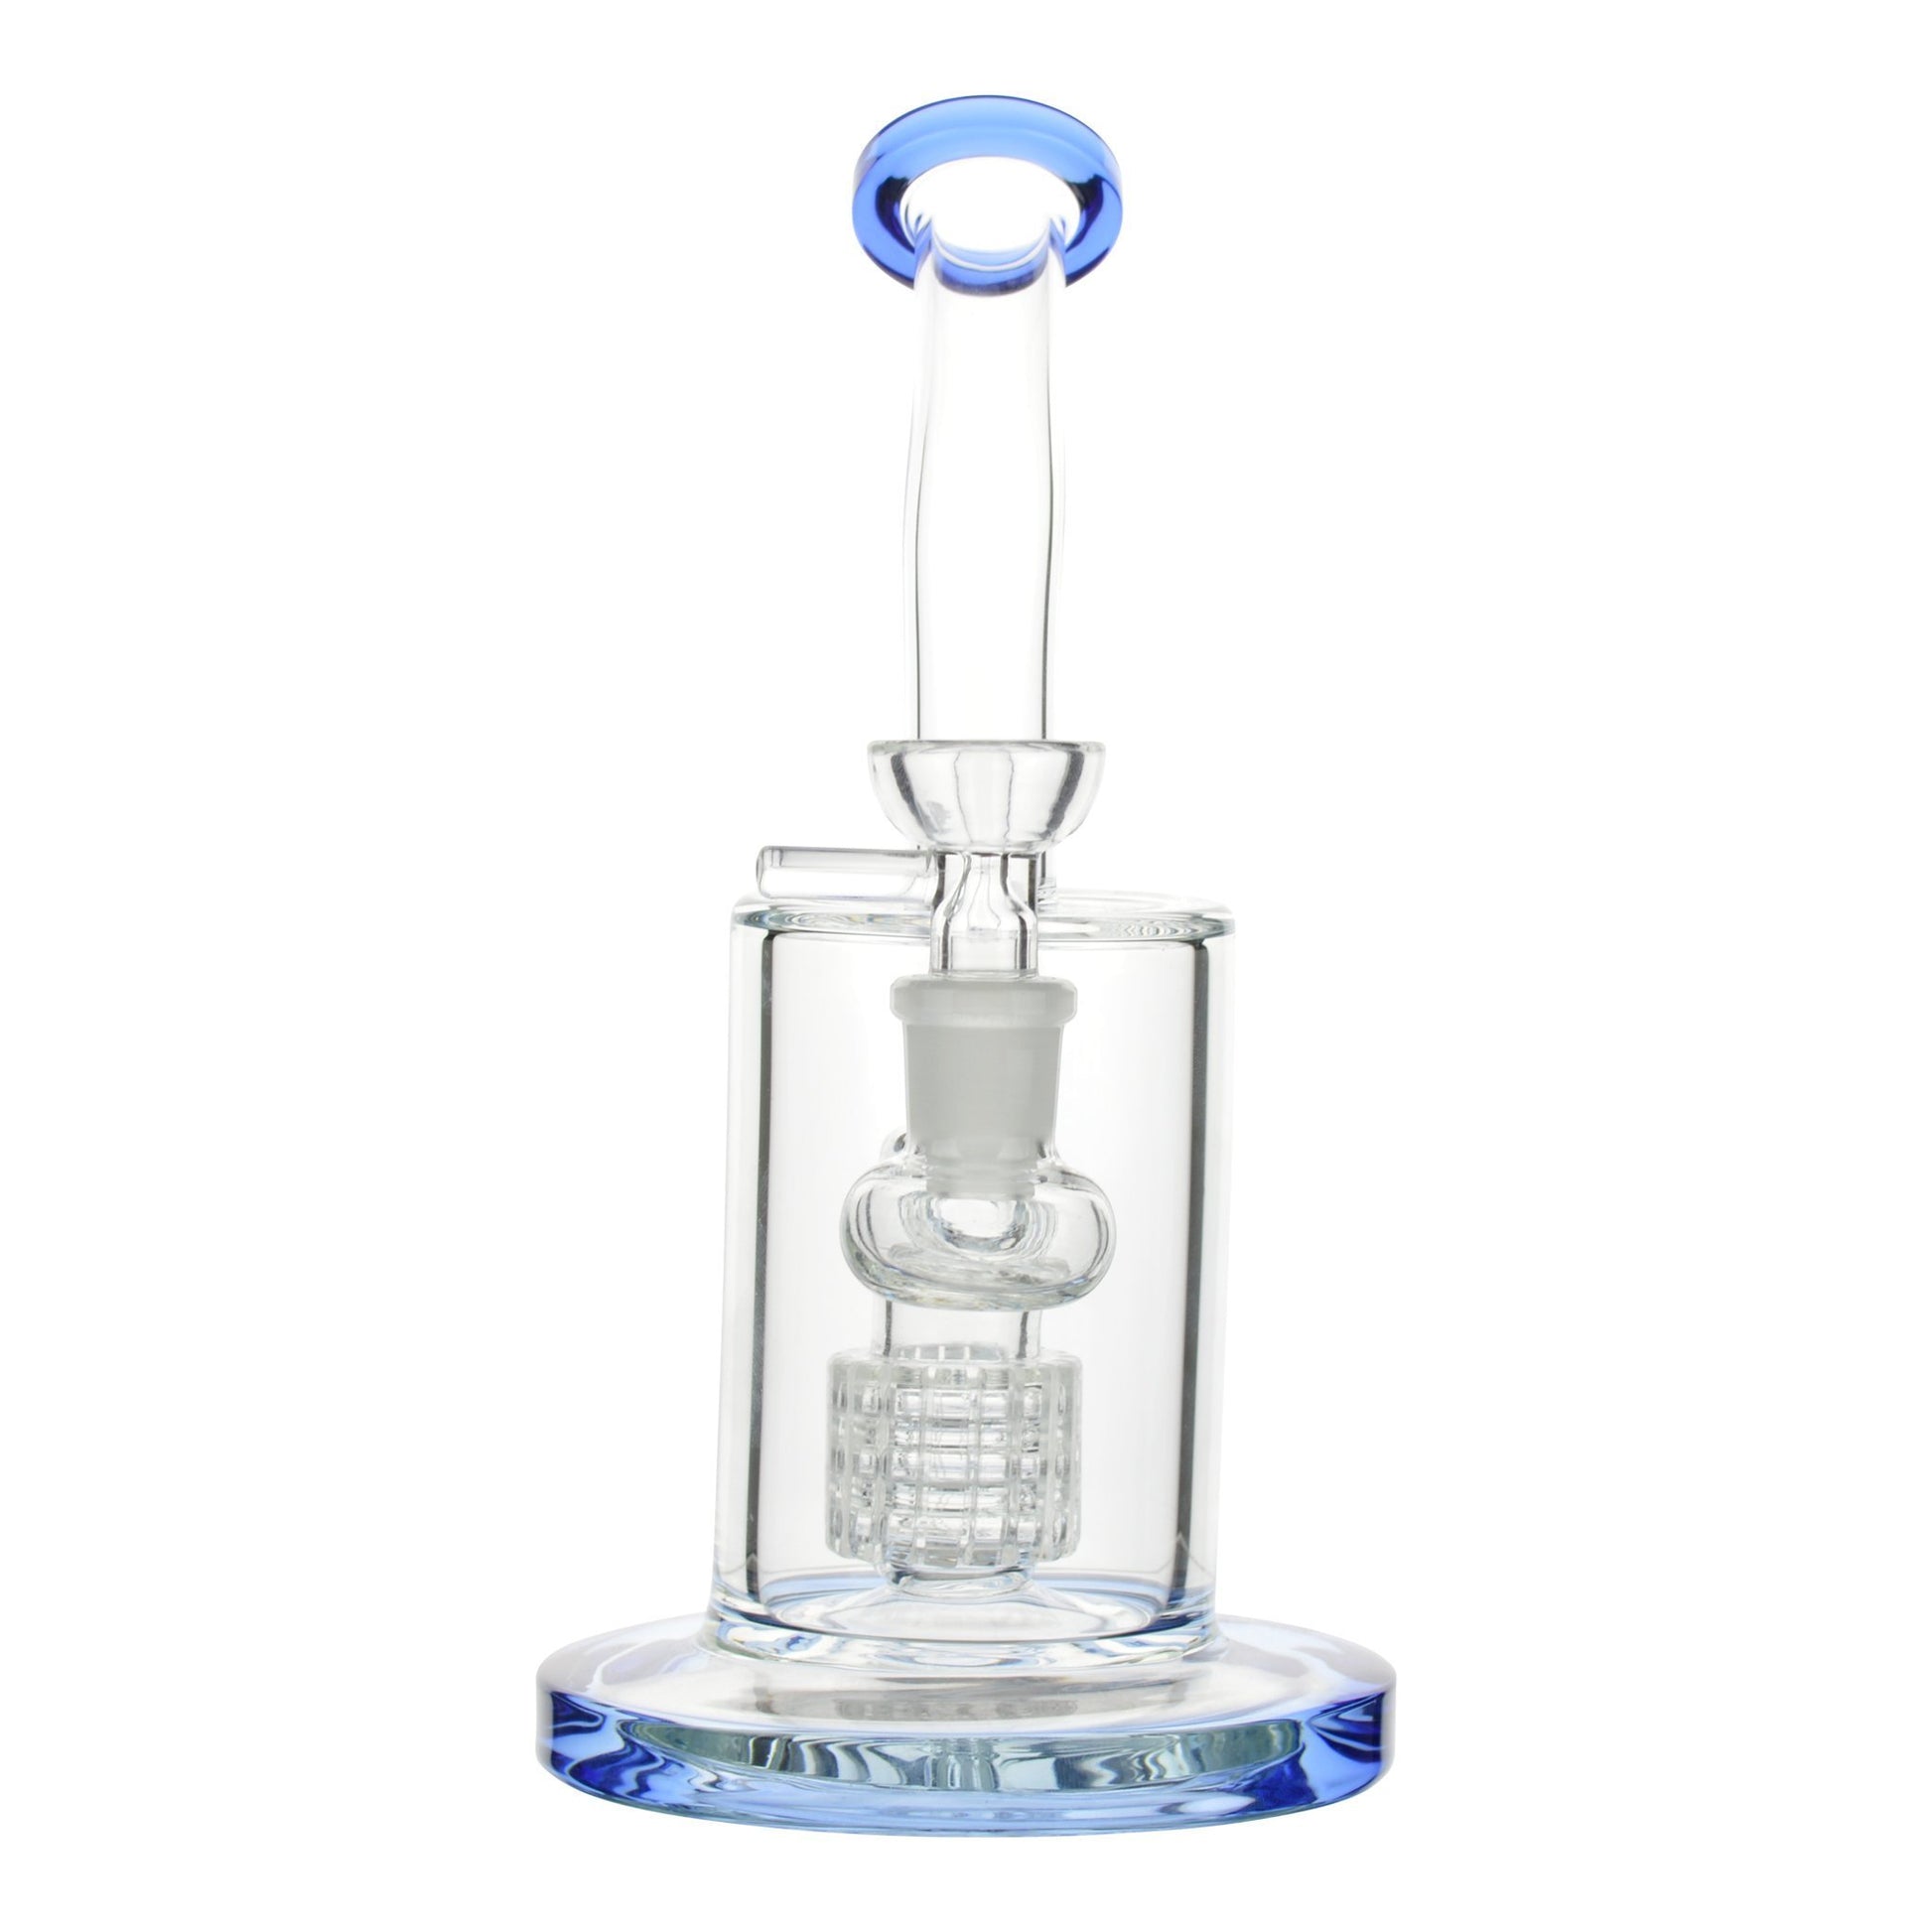 Mad Scientist Bong - 7in